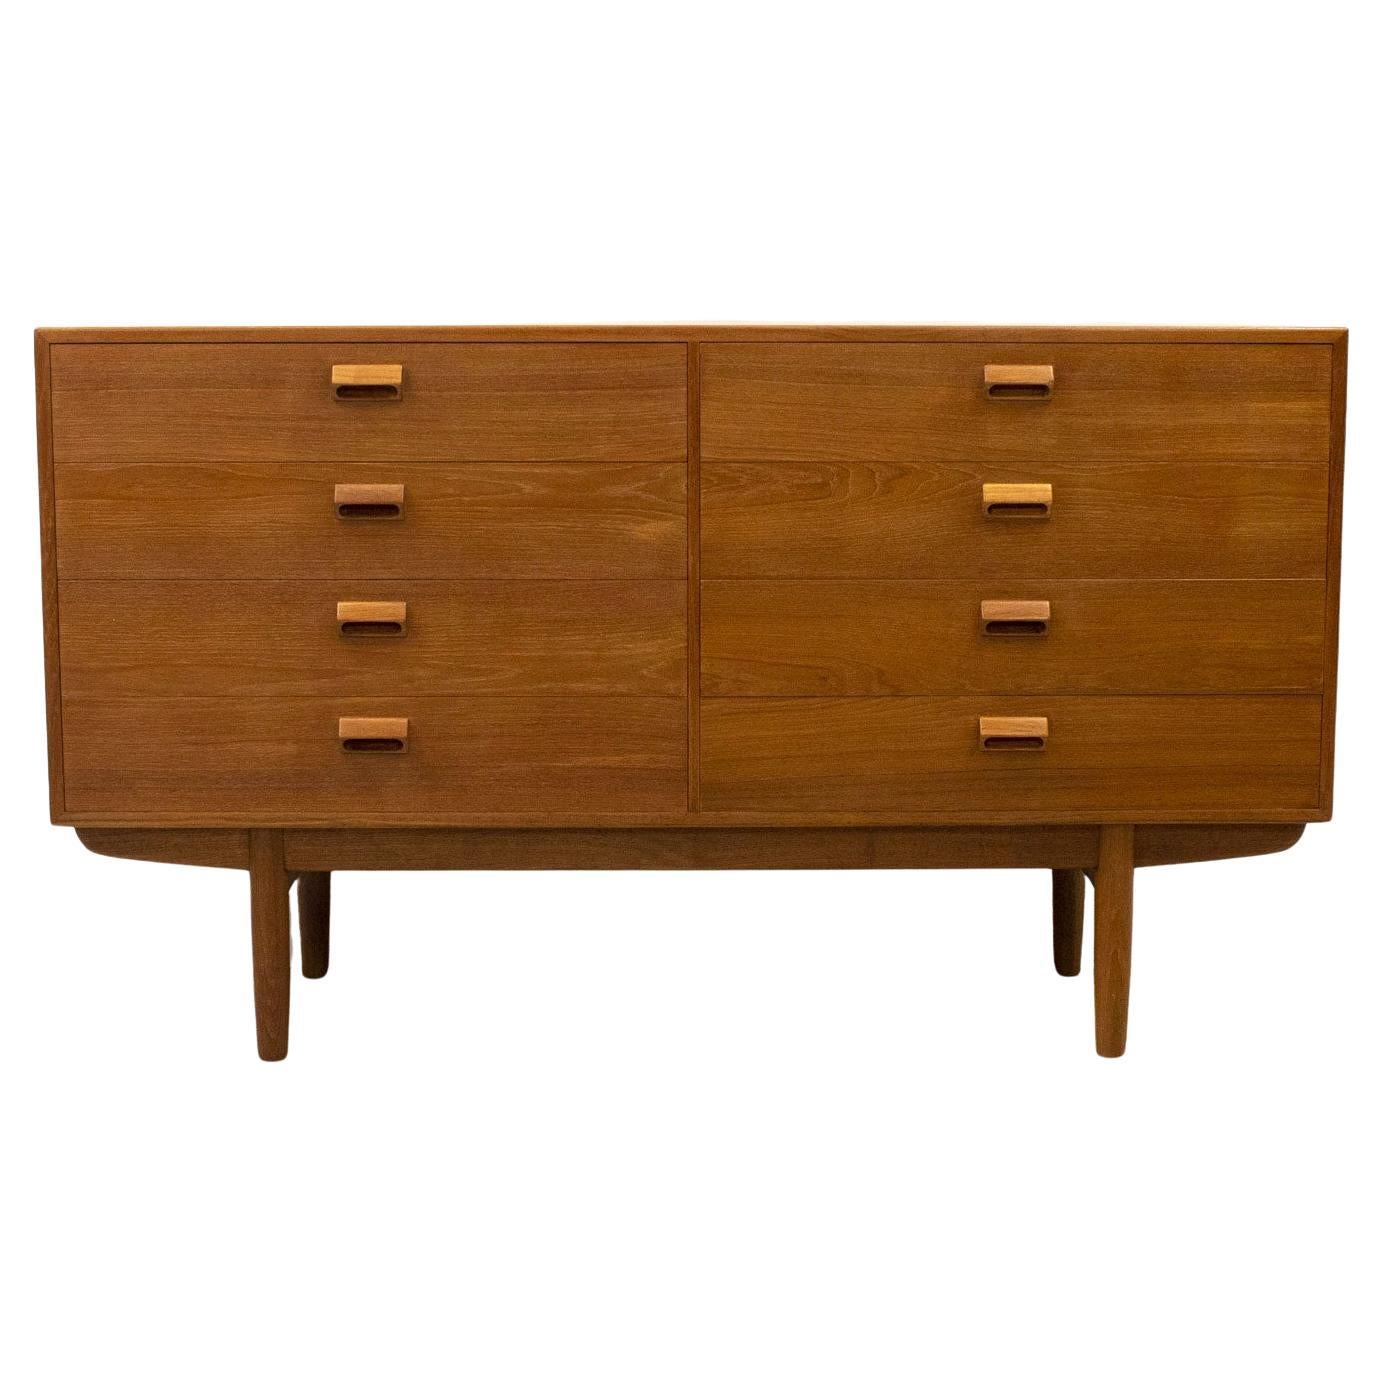 Danish Large Teak Chest of Drawers by Borge Mogensen for Soborg, 1950s For Sale